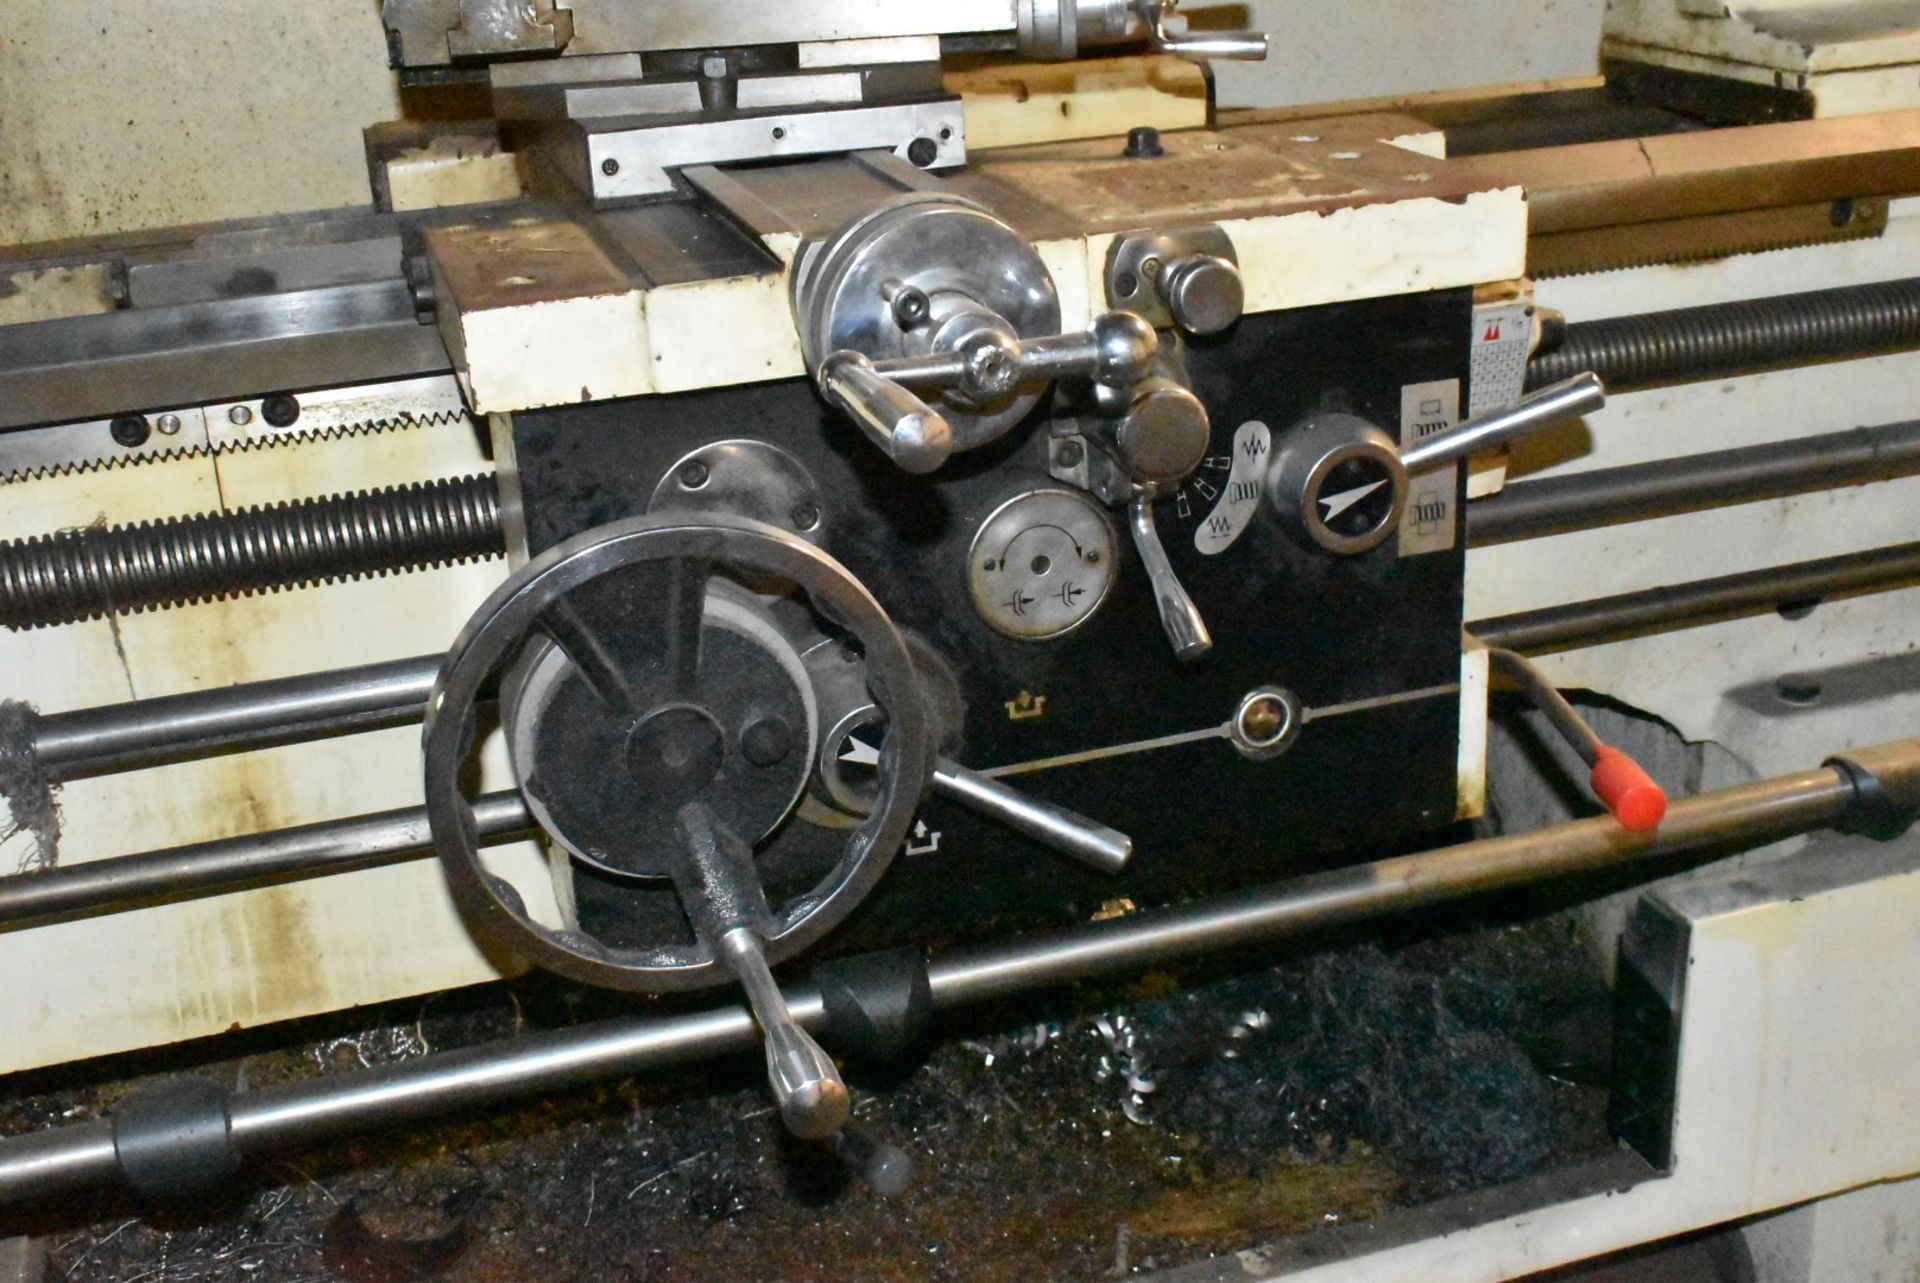 JET (2010) GH-1440ZX GAP BED ENGINE LATHE WITH 14" SWING OVER BED, 23" SWING IN THE GAP, 40" BETWEEN - Image 8 of 16